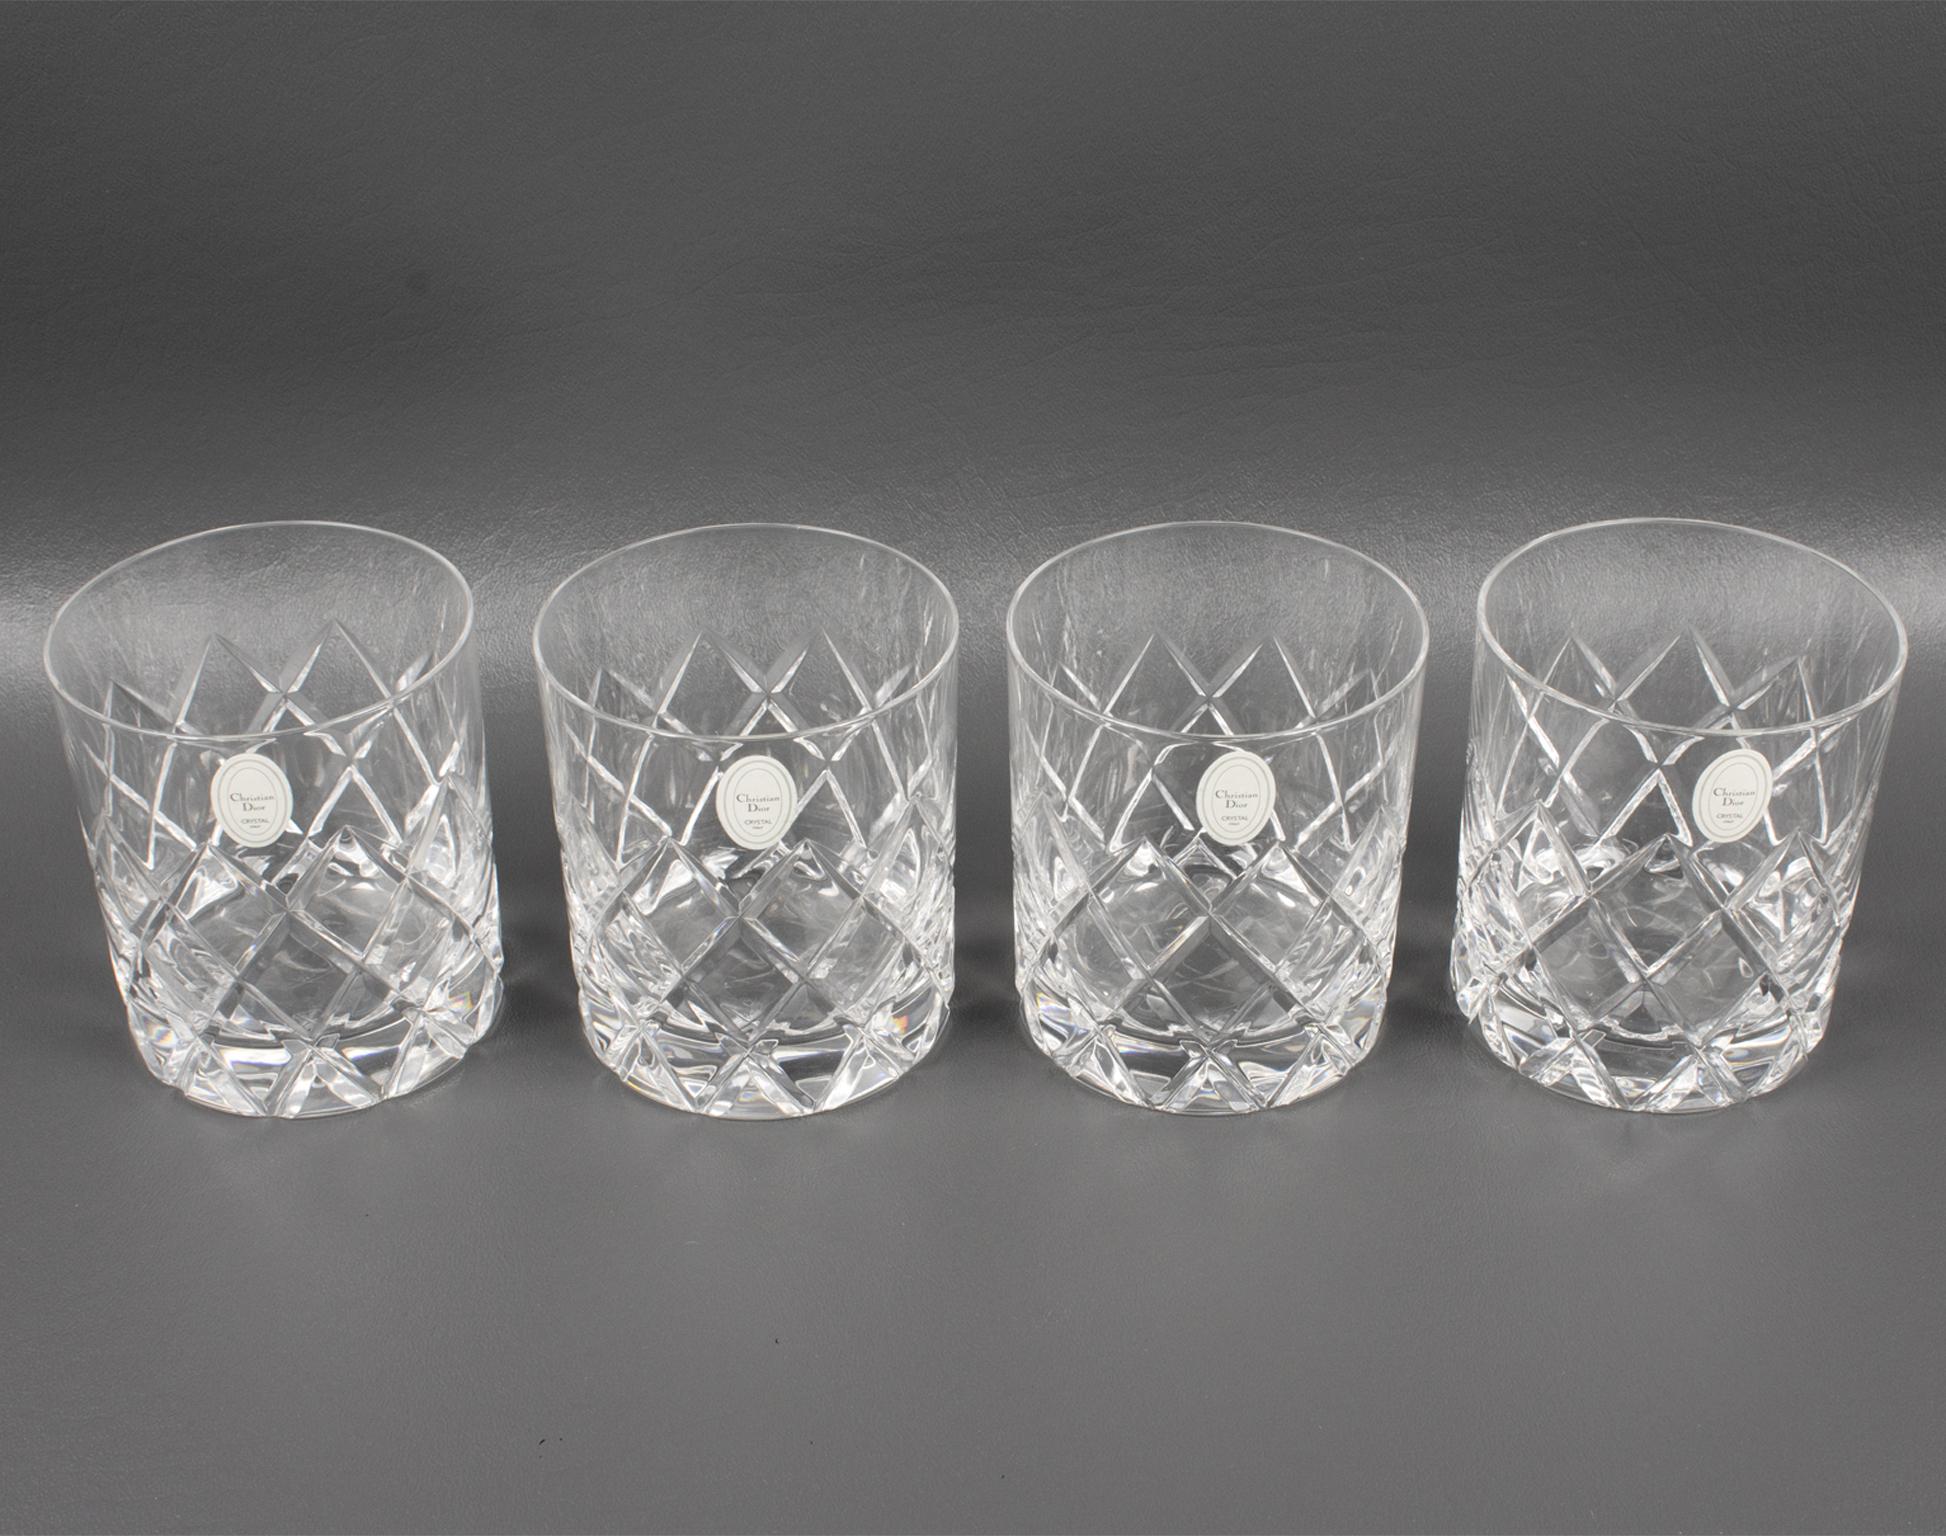 Christian Dior Crystal Decanter and Glasses Set, 5 pieces in Original Box, 1980s 1